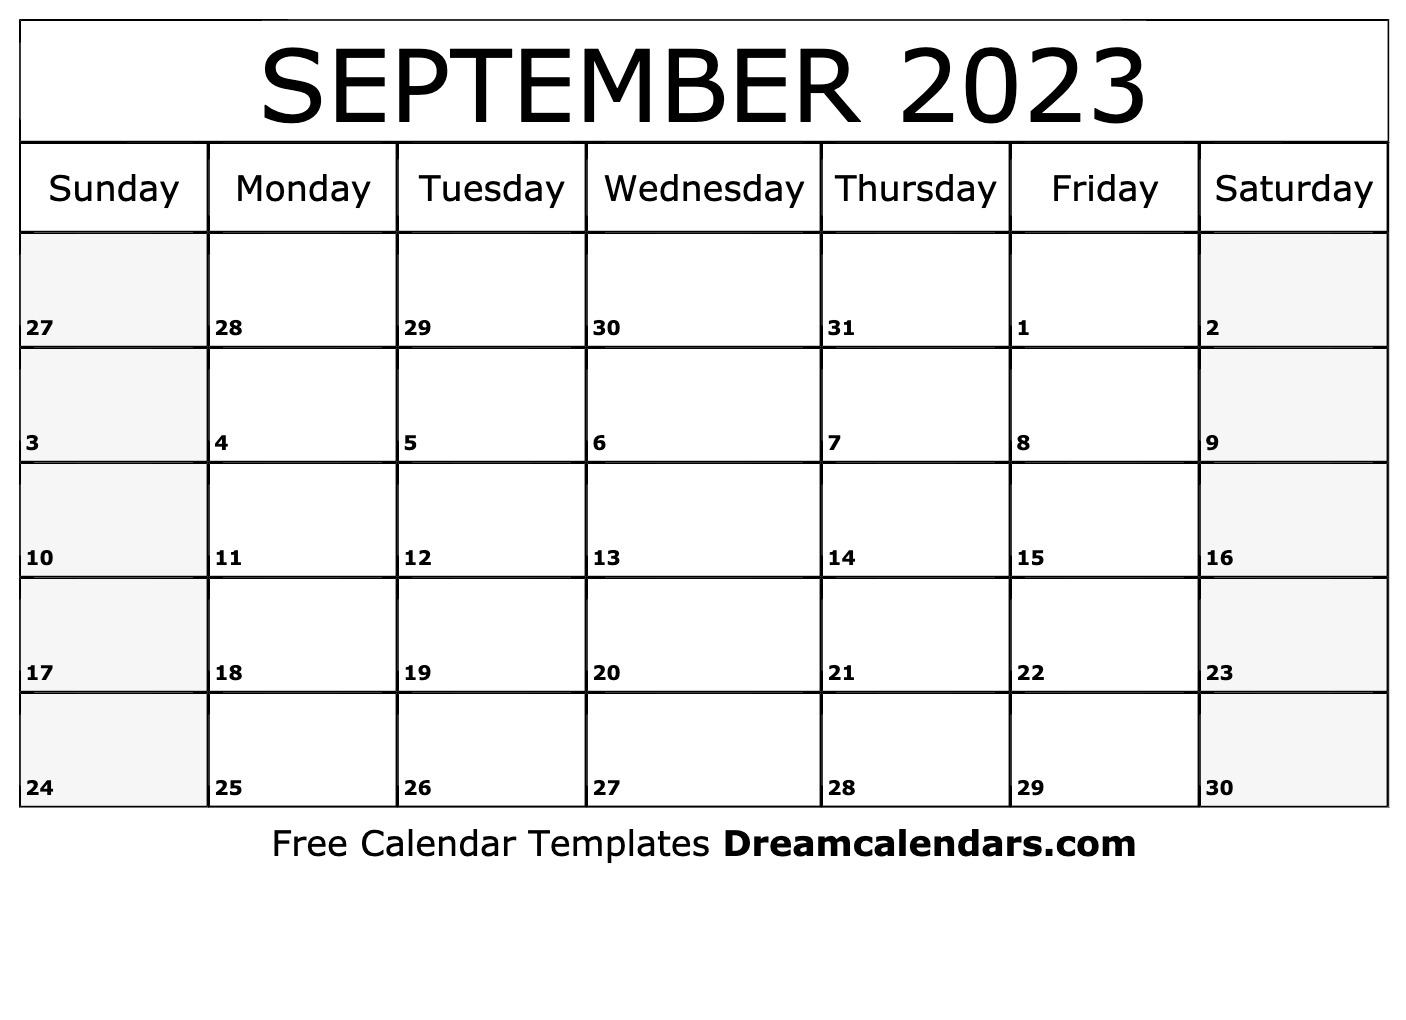 collection-of-september-2023-photo-calendars-with-image-filters